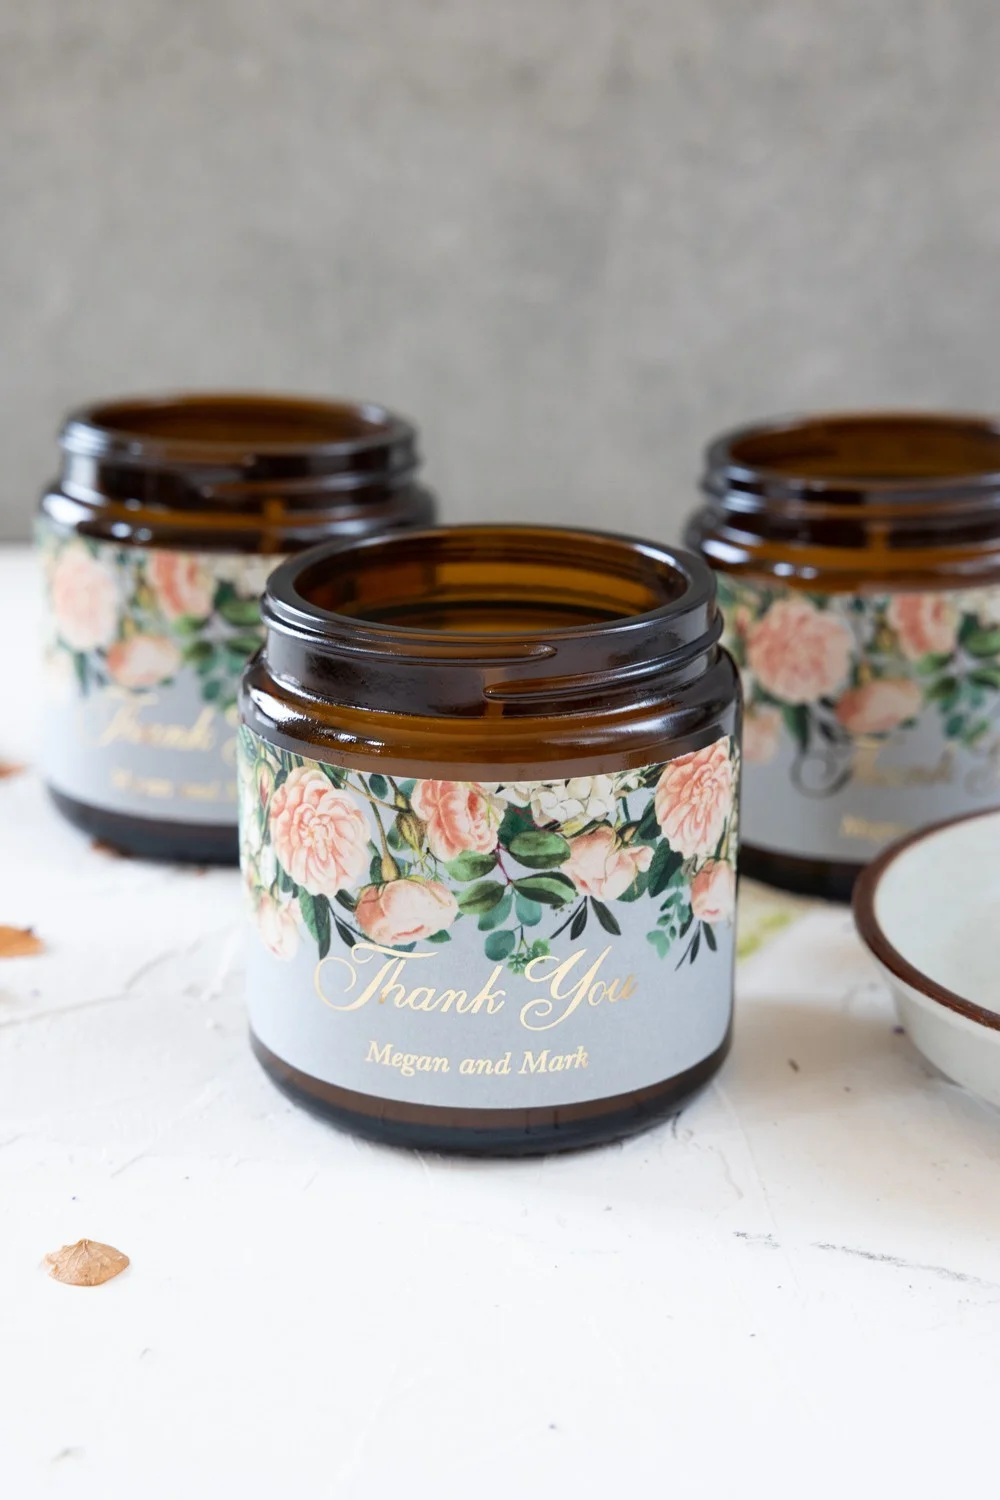 Soy Wax Jar Candles - S25: Blush Pink Roses & Peach Scented | Bridal Shower Favors - S25